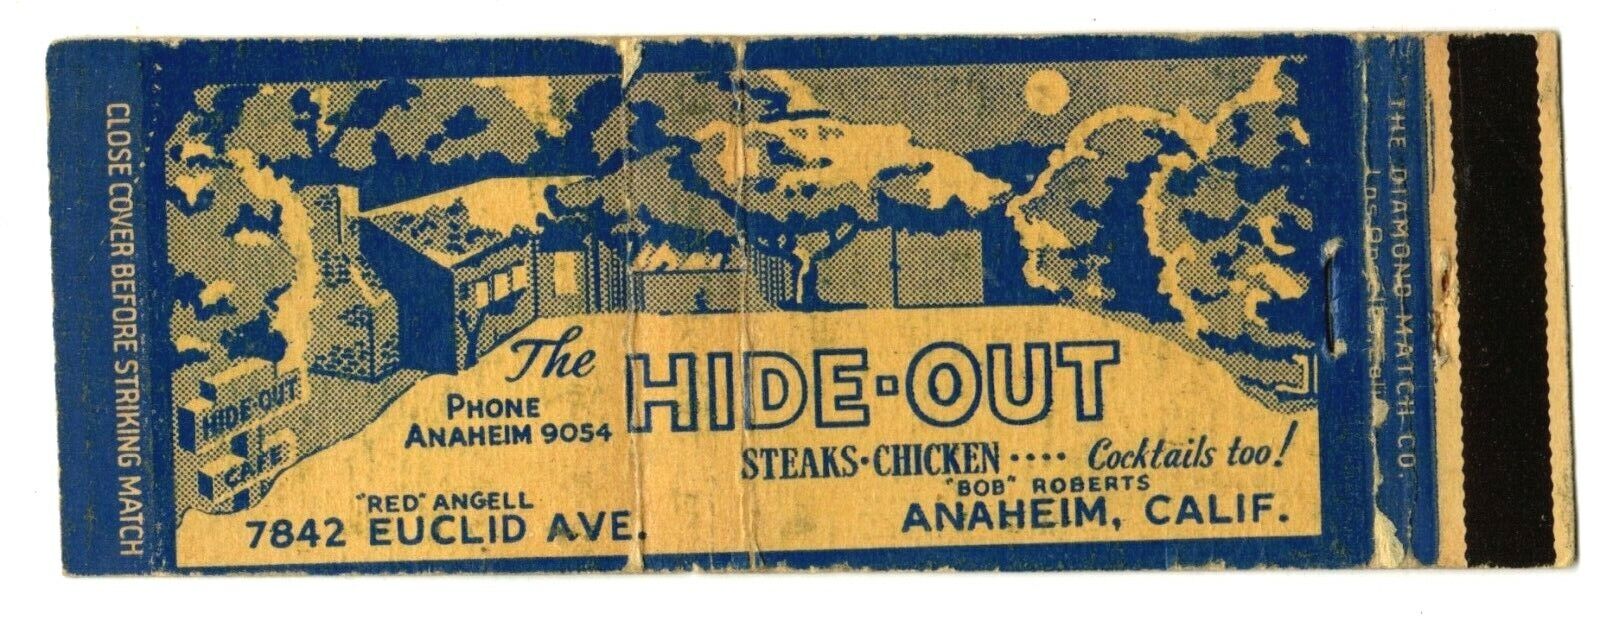 THE HIDE-OUT matchbook matchcover - ANAHEIM, CALIFORNIA - VERY OLD